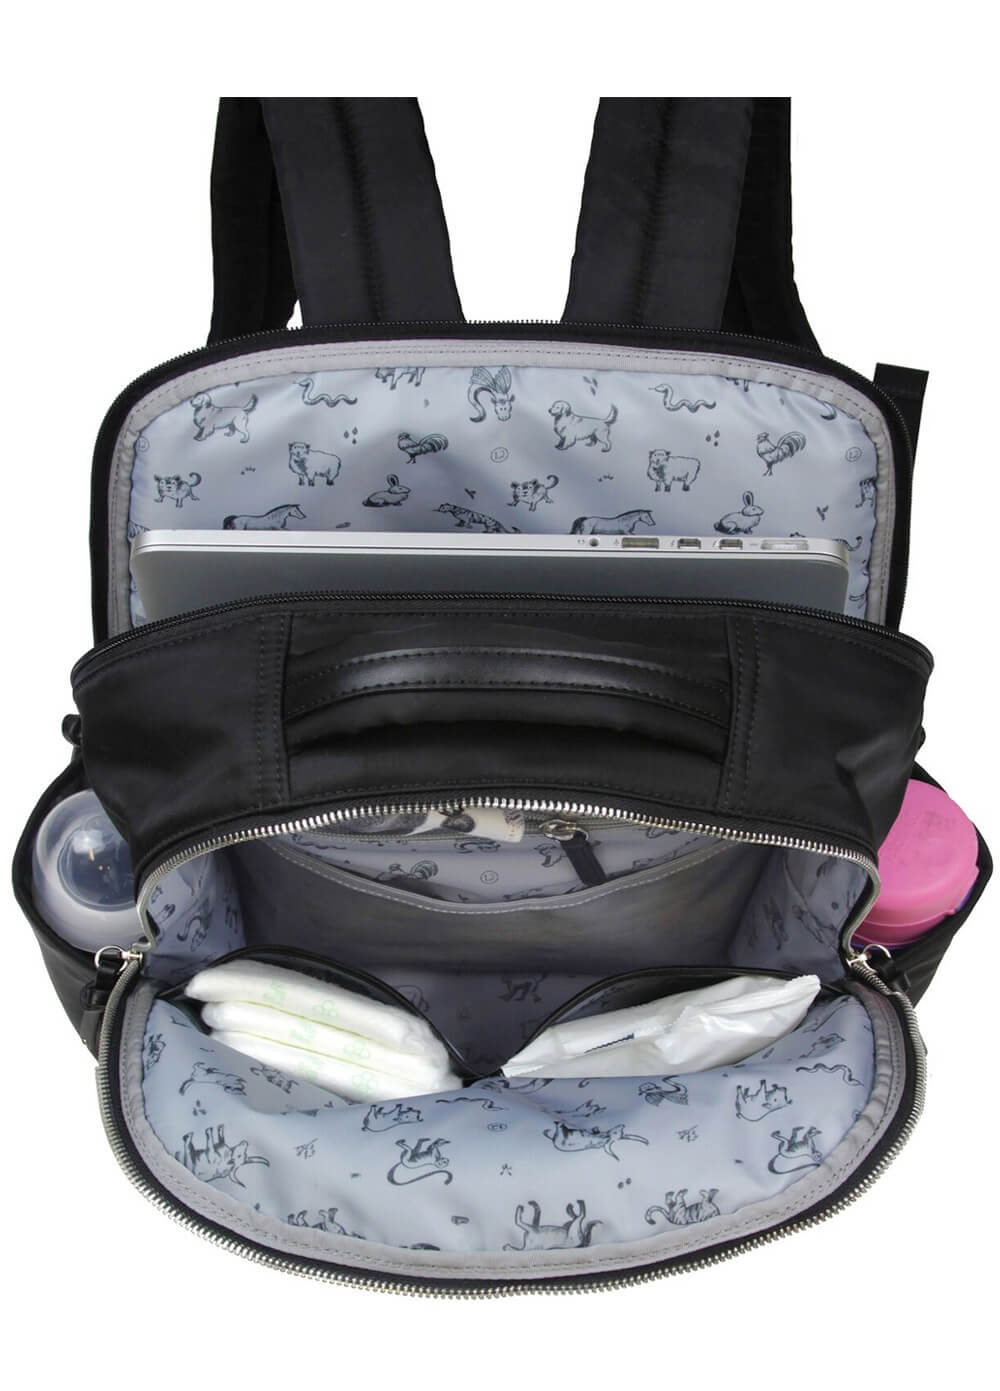 On-The-Go Baby Change Backpack in Black by TWELVE little